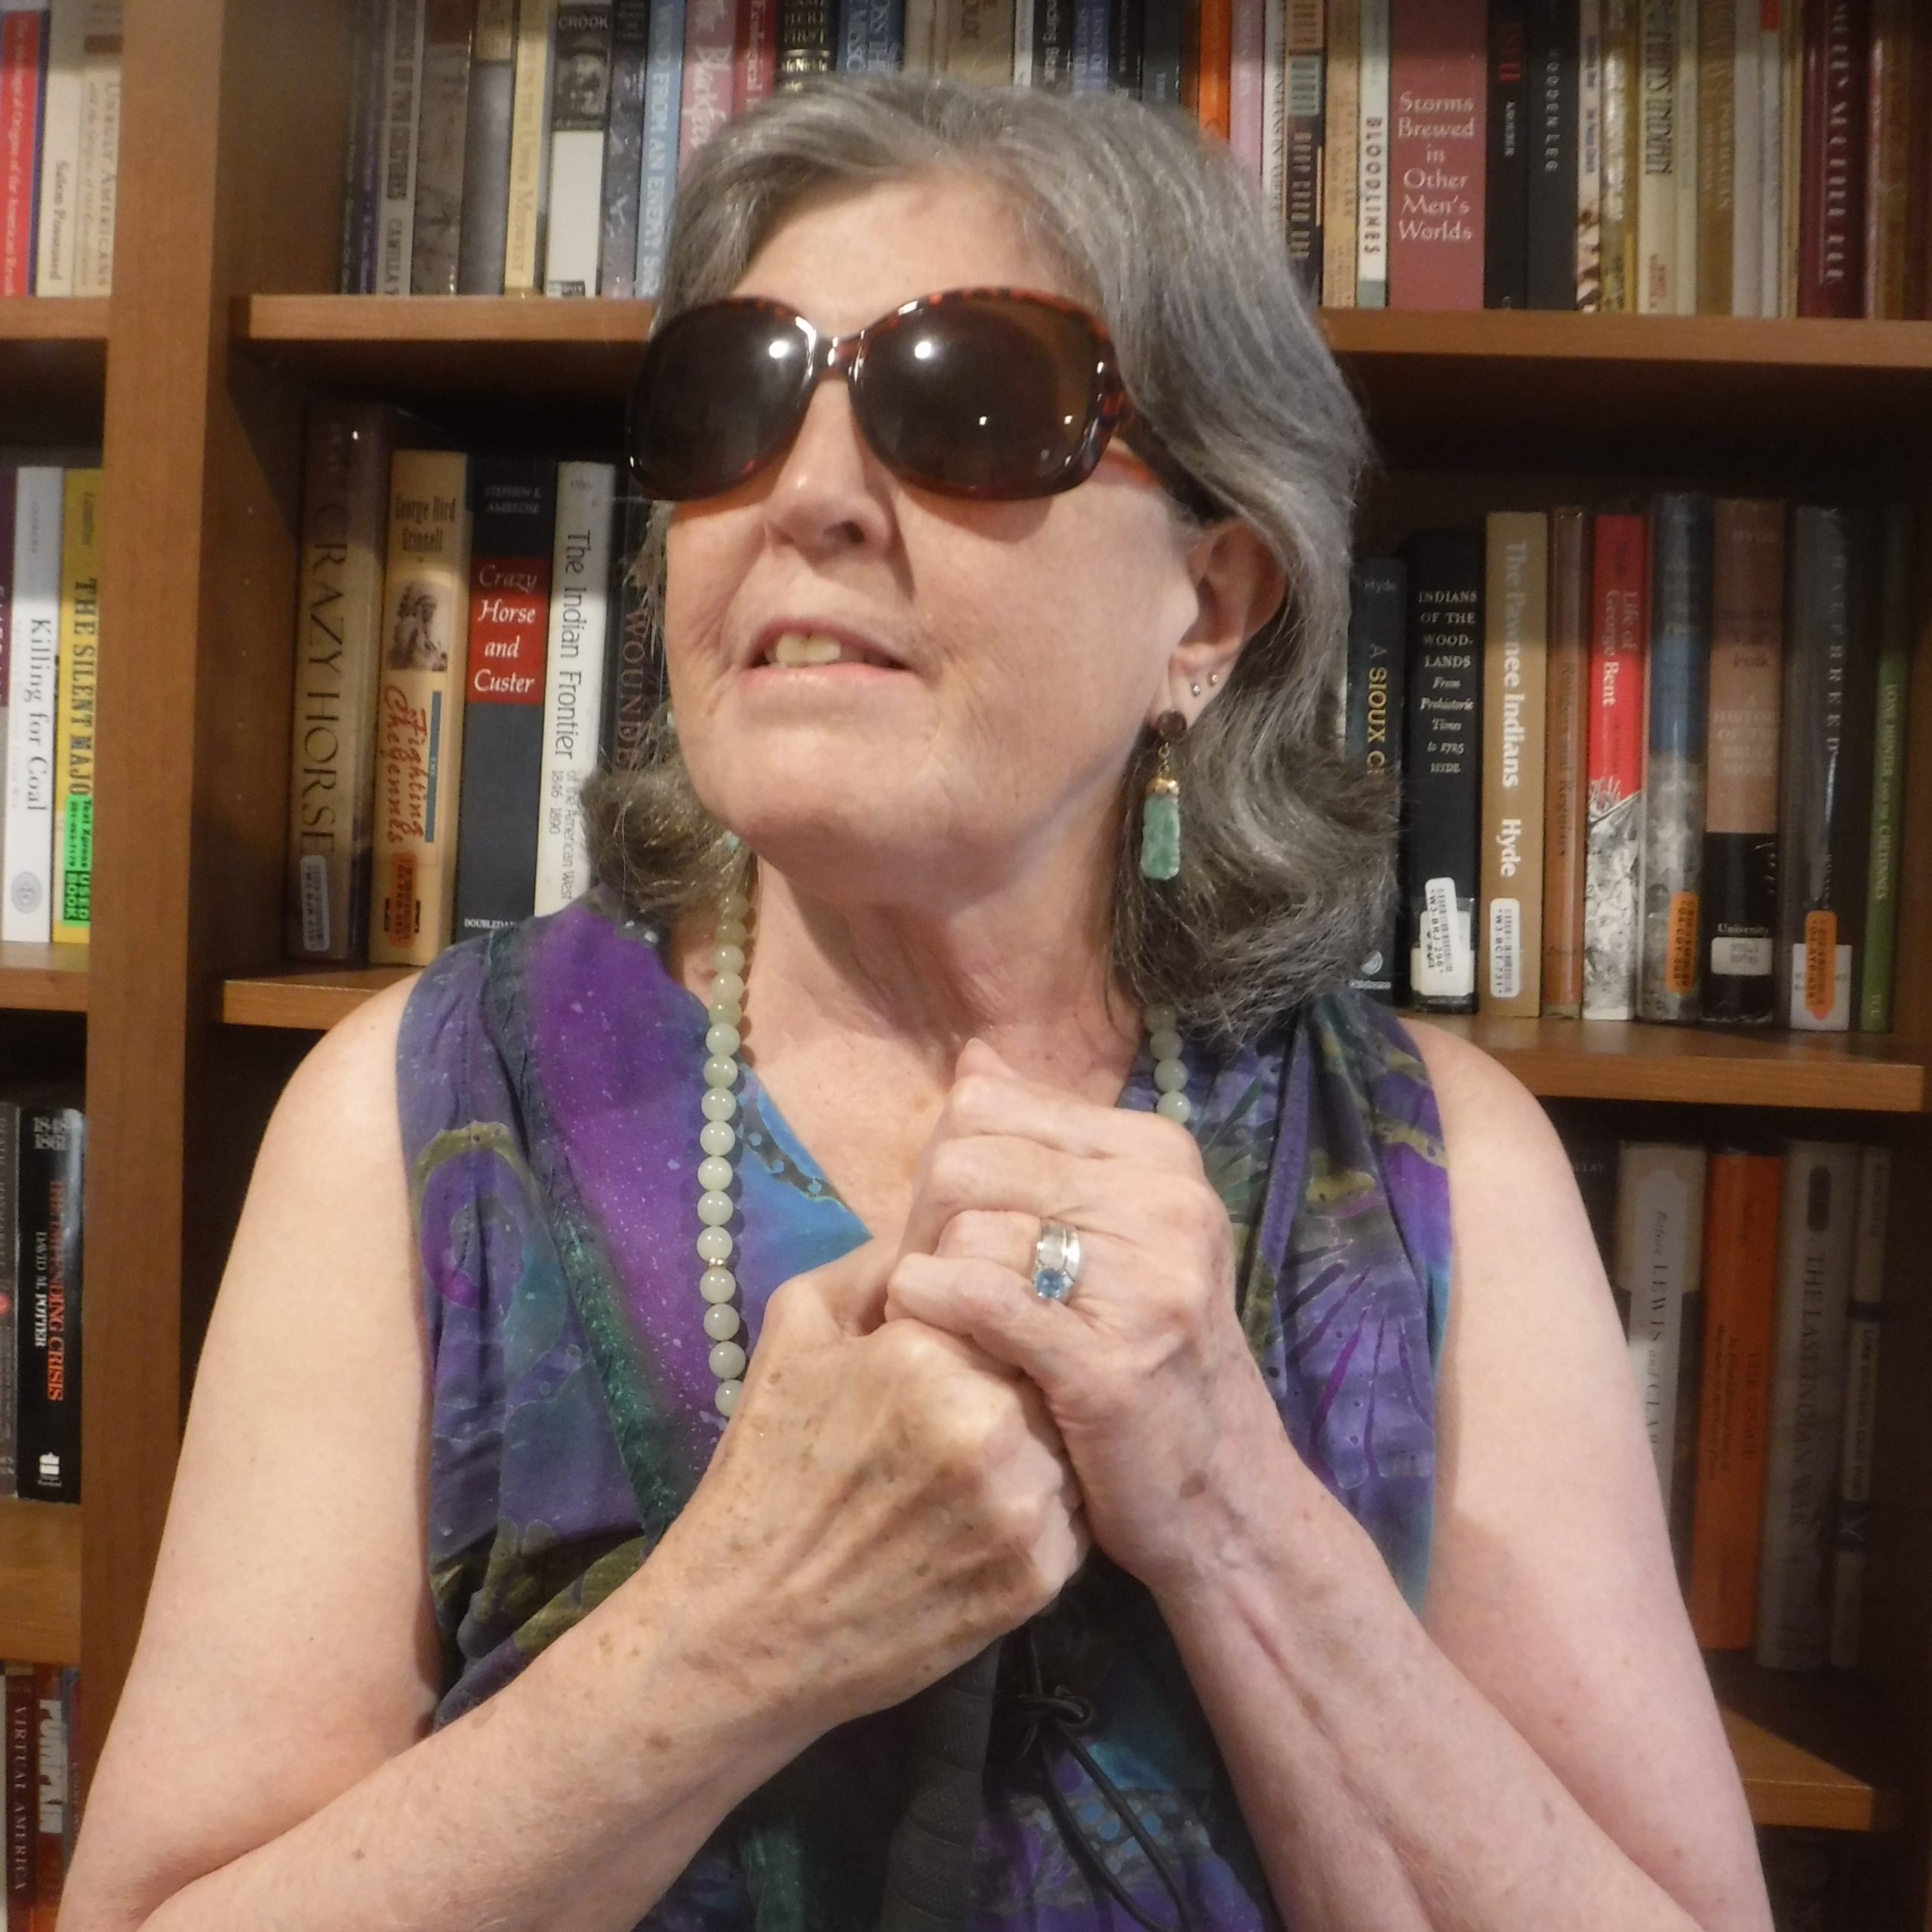 The author, a white woman with short grey hair, stands in front of a bookshelf. She is wearing dark sunglasses and holding on to a cane.